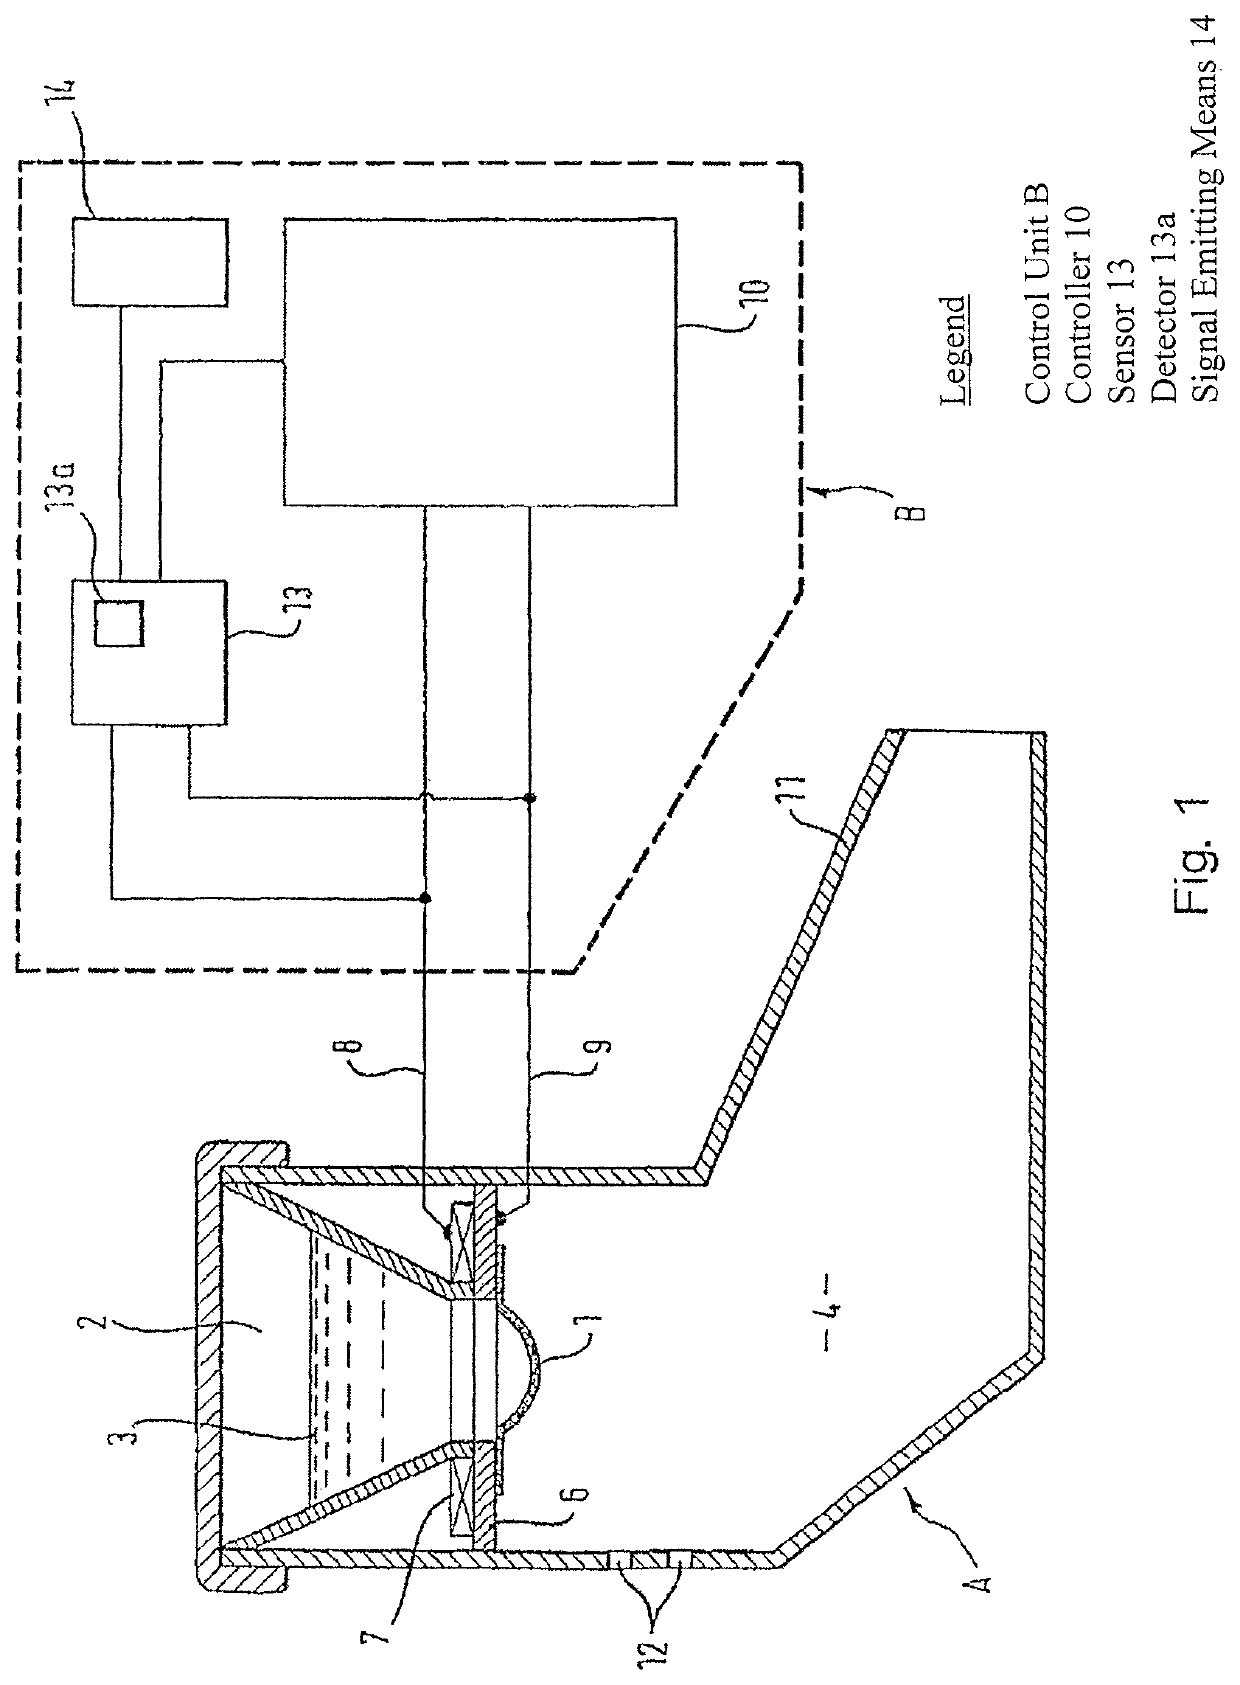 Aerosol delivery device and method of operating the aerosol delivery device